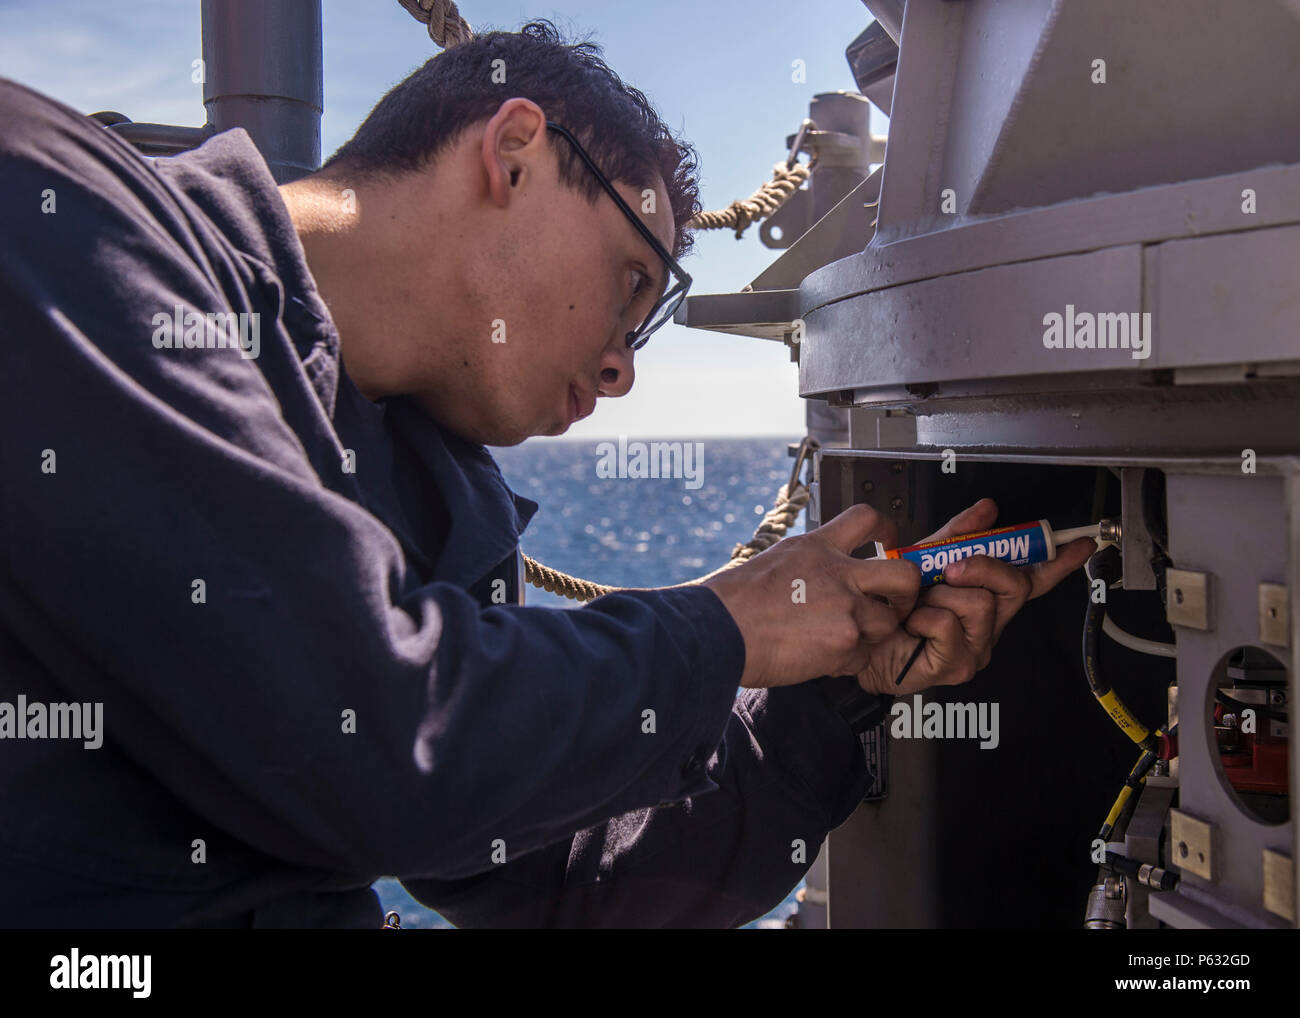 20160403-N-FV739-051  PACIFIC OCEAN (April 3, 2016) – Gunner’s Mate 3rd Class Yeison Bobadilla performs maintenance on a 25mm Mk 38 Mod 2 machine gun system on the fantail of guided-missile cruiser USS Port Royal (CG 73) during an independent deployer certification exercise (IDCERTEX). The IDCERTEX is designed to certify select U.S. ships as independent deployers as tasked by Commander, U.S. 3rd Fleet. (U.S. Navy photo by Mass Communication Specialist 3rd Class Christopher A. Veloicaza/Released) Stock Photo